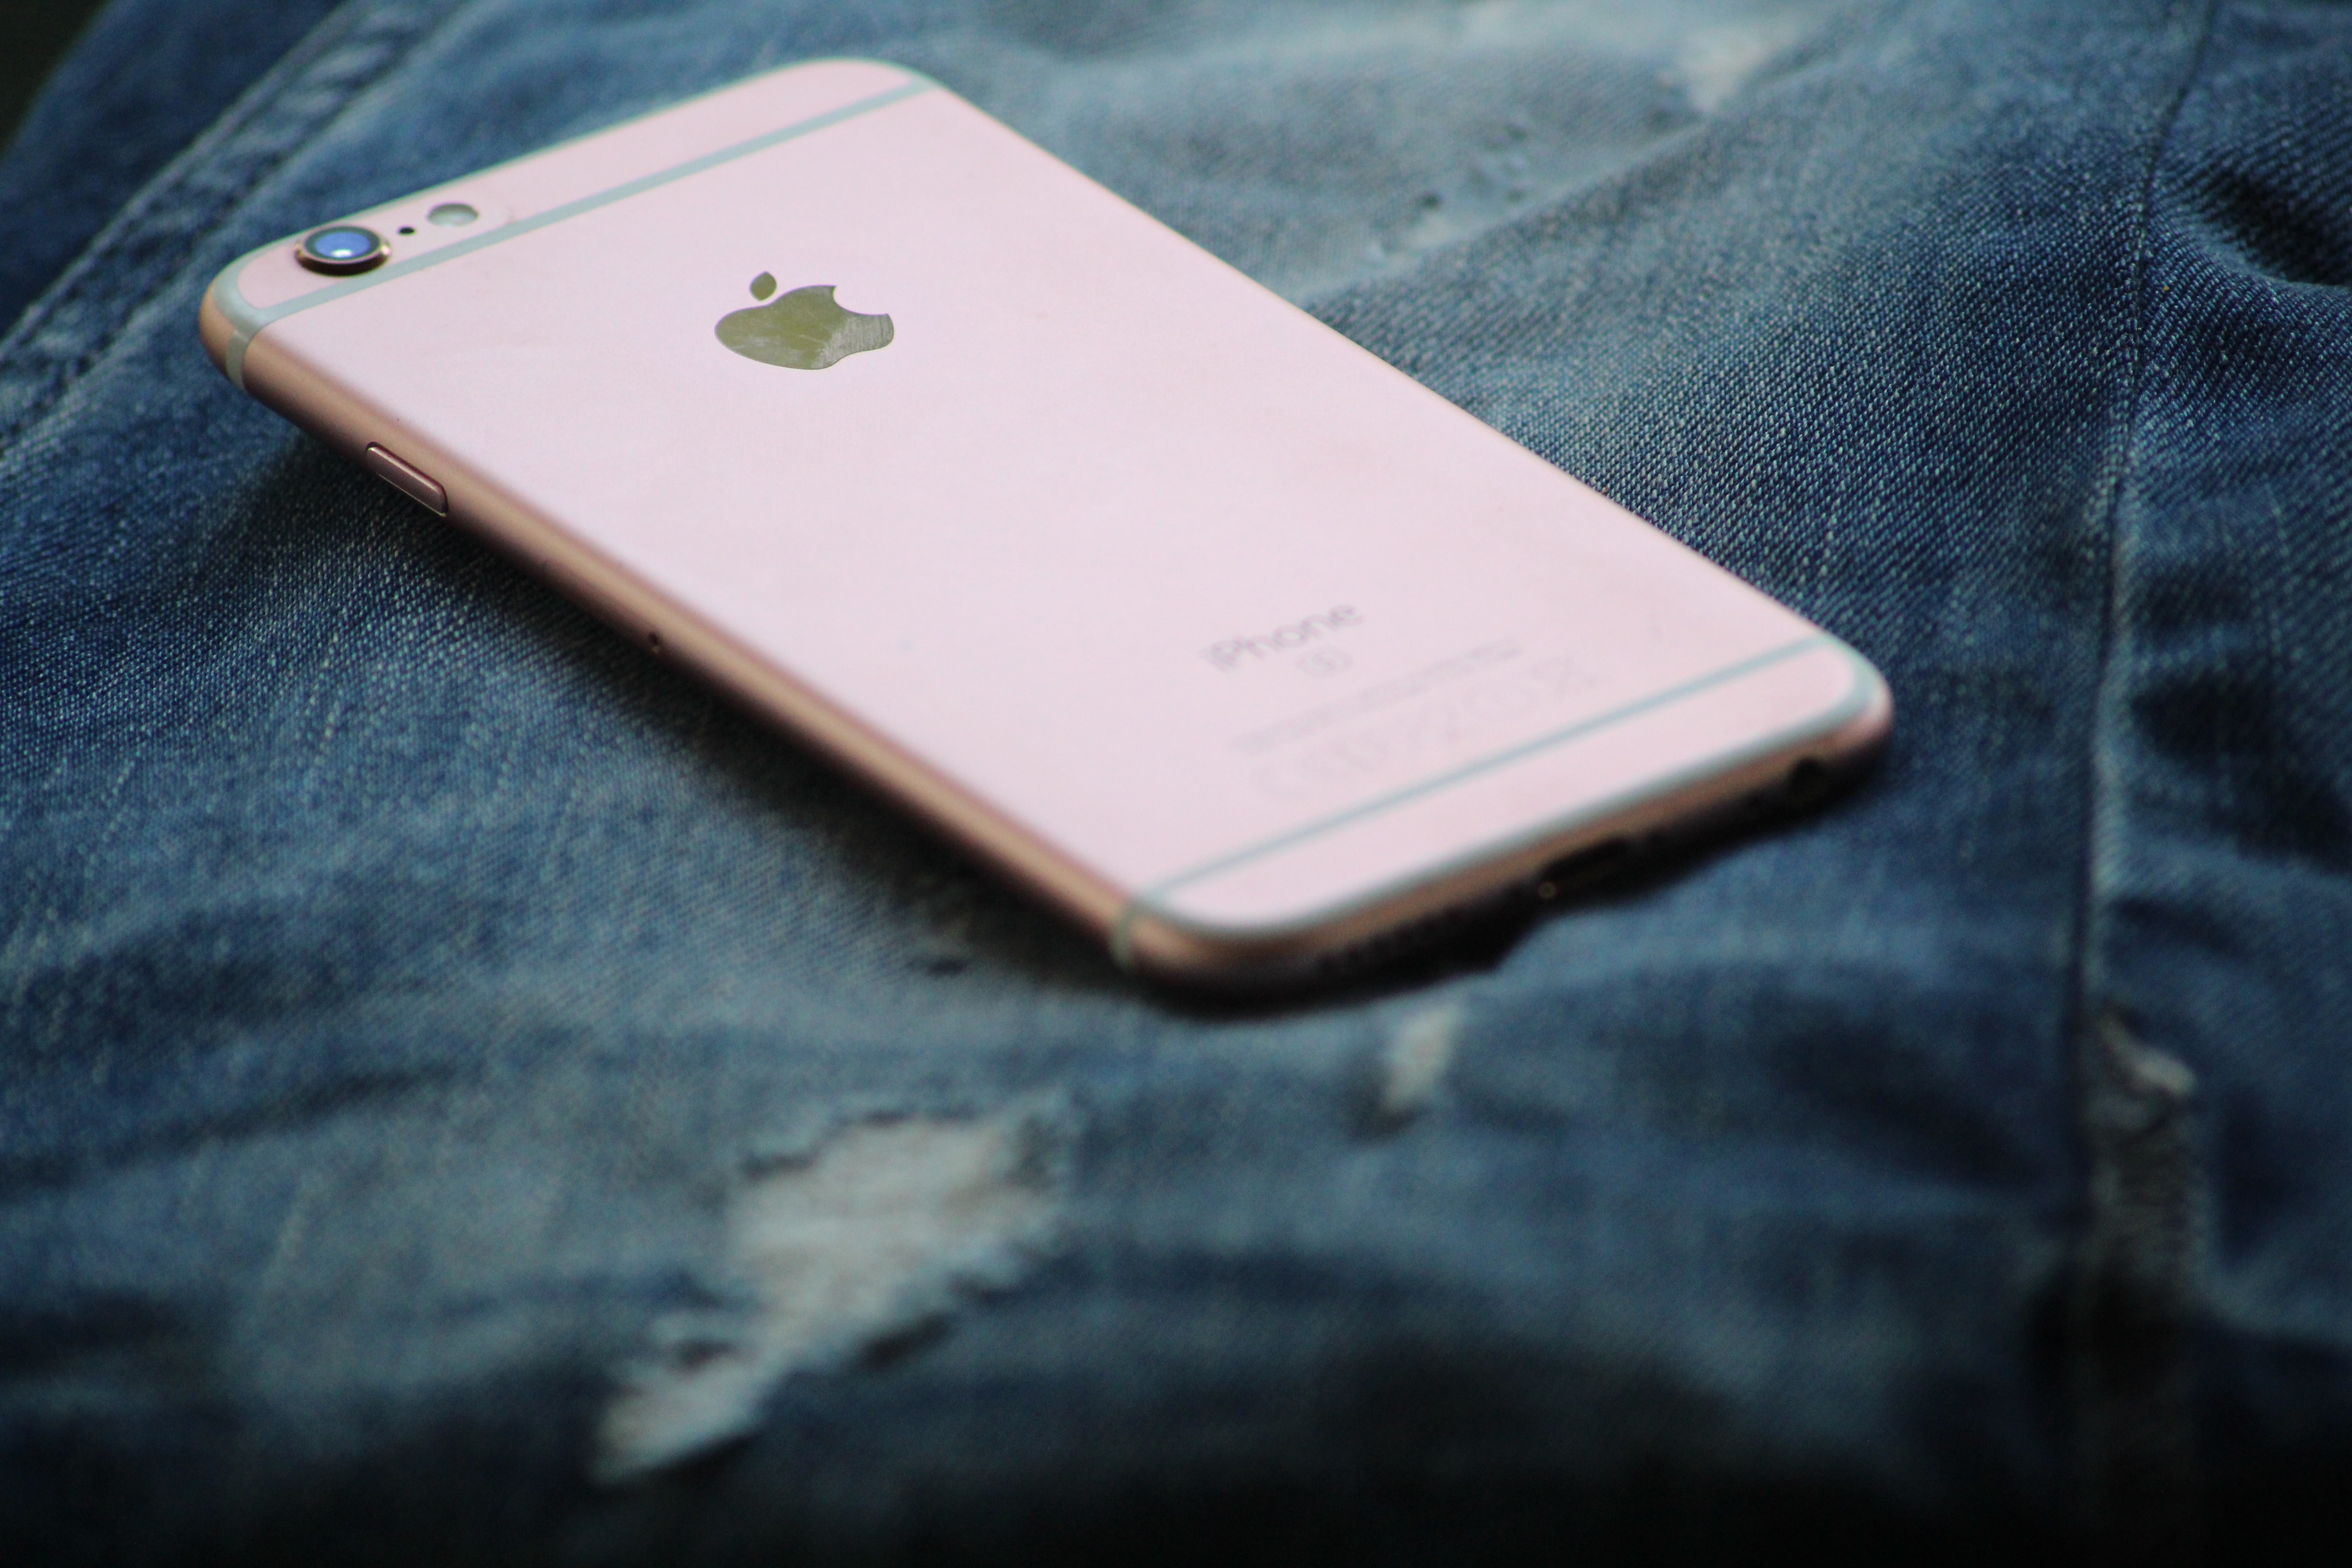 Close-up photography of rose gold iphone 6s on top of blue denim jeans